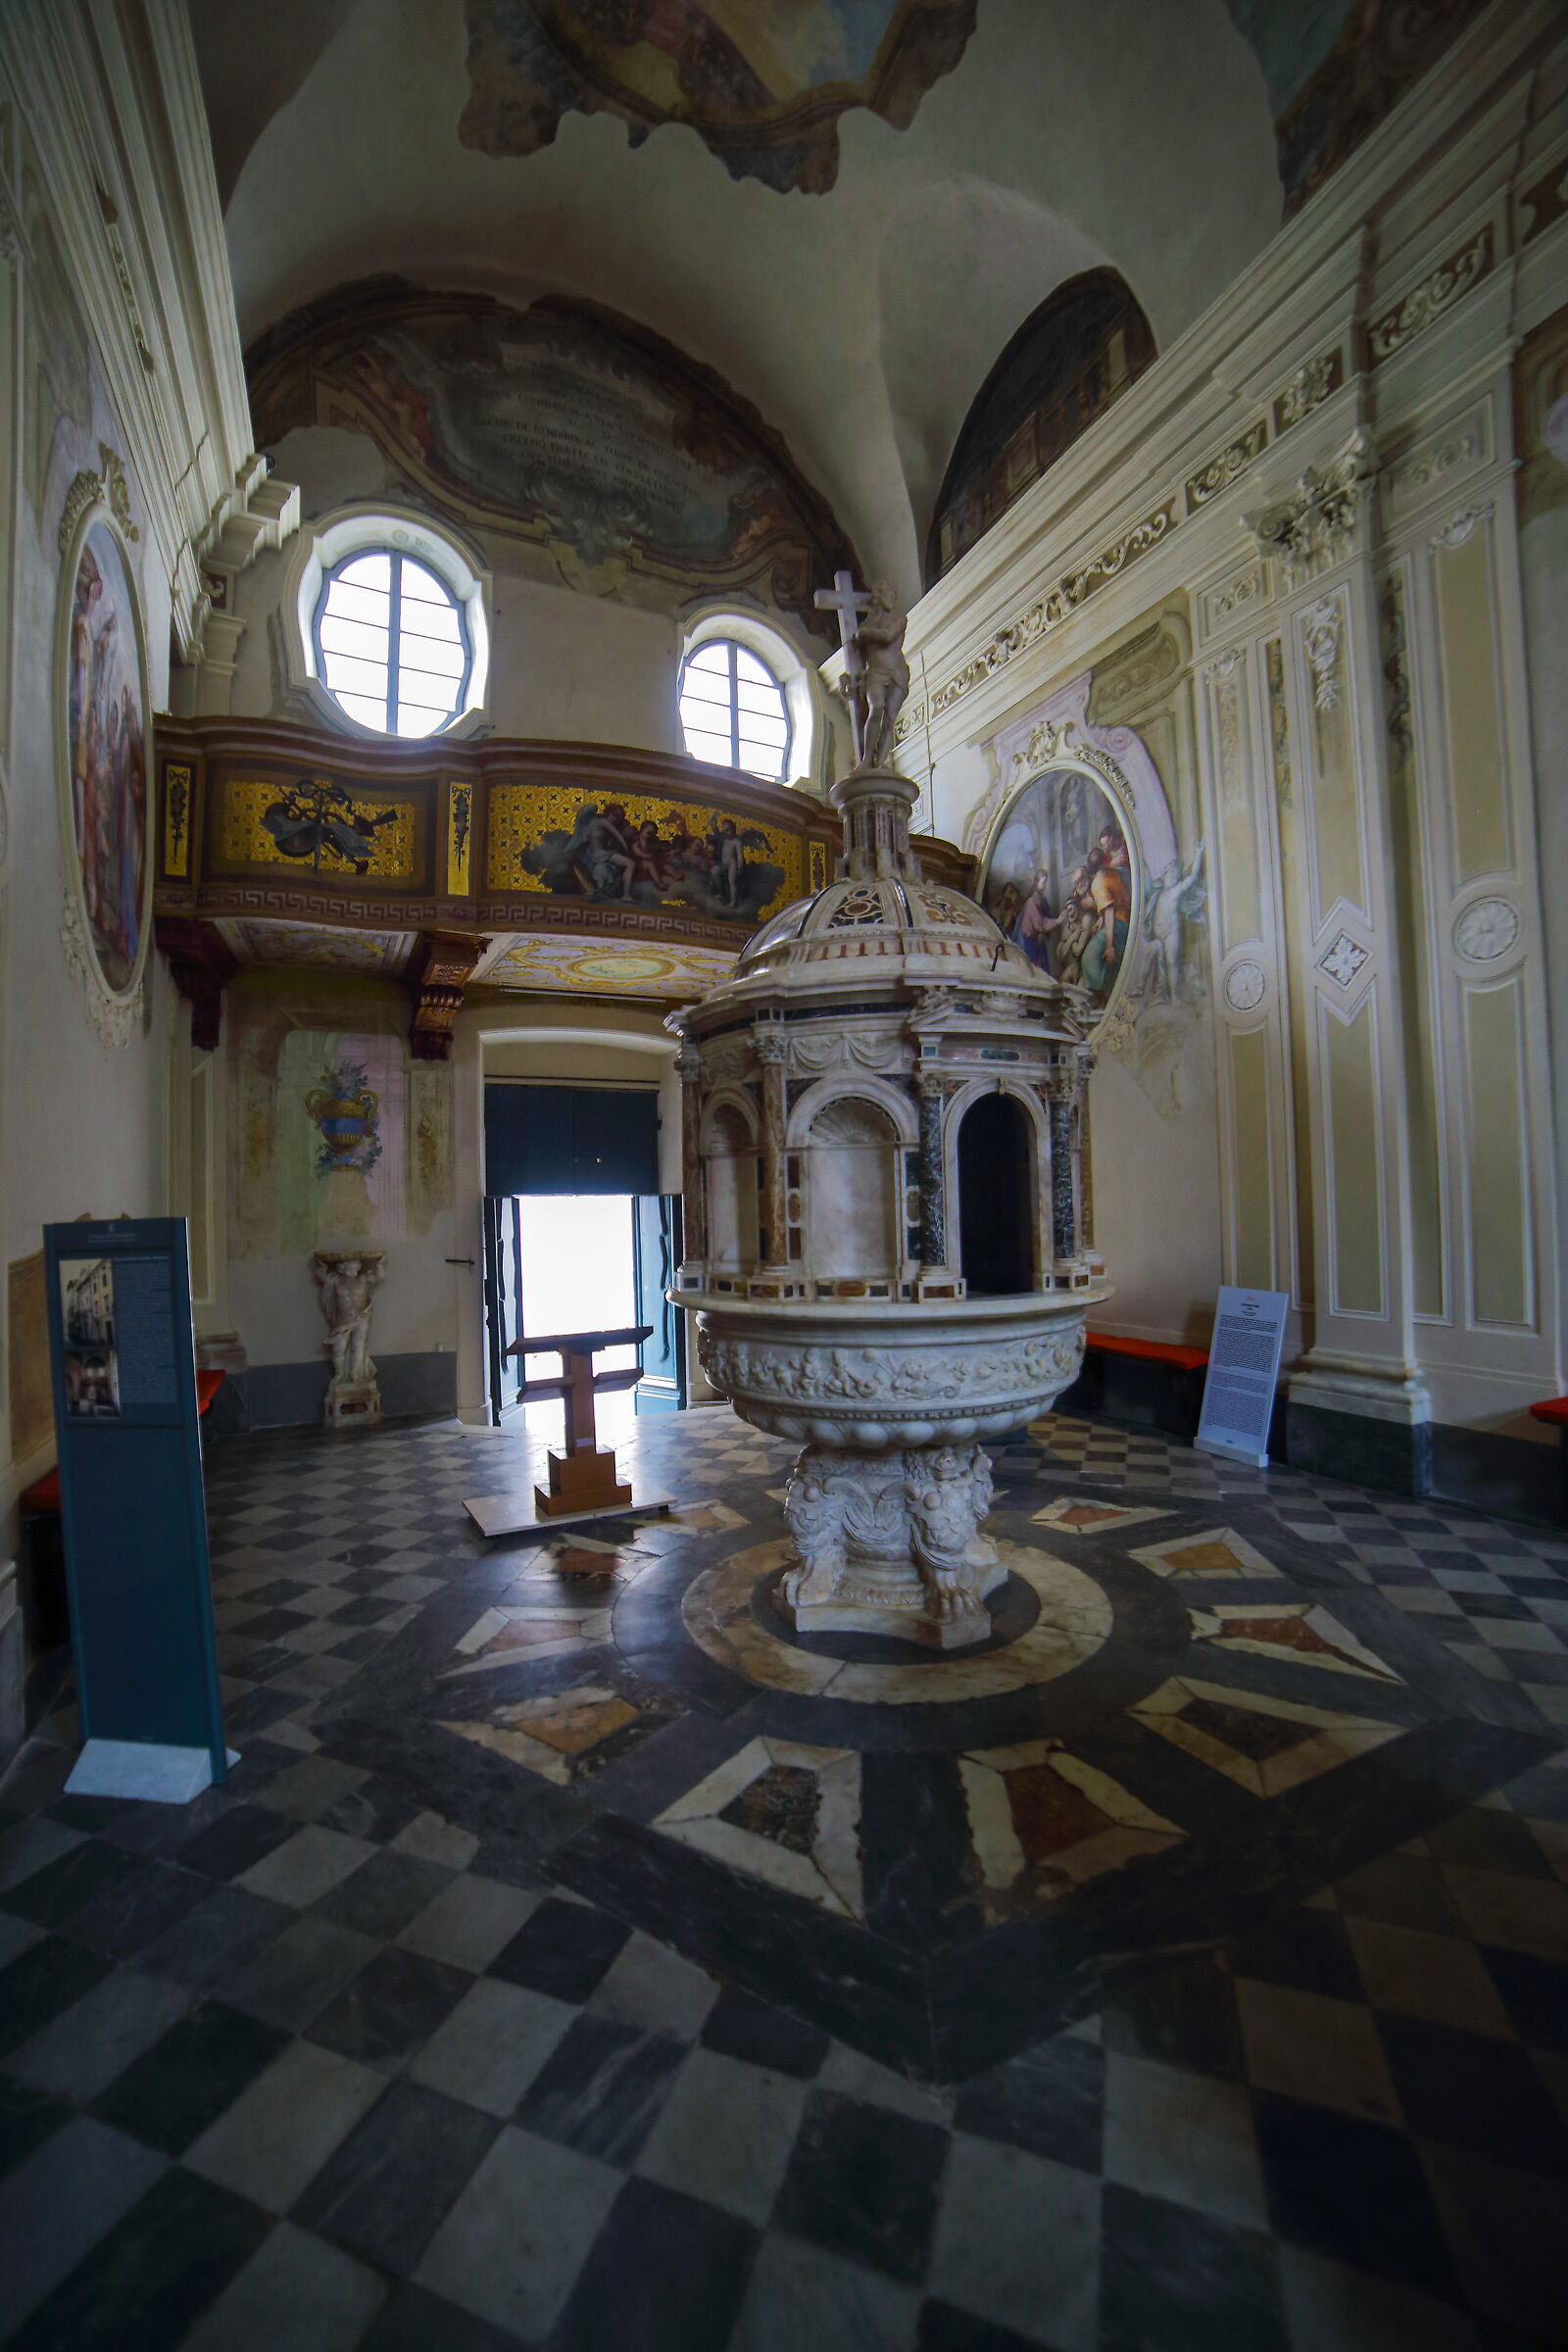 The baptistery...